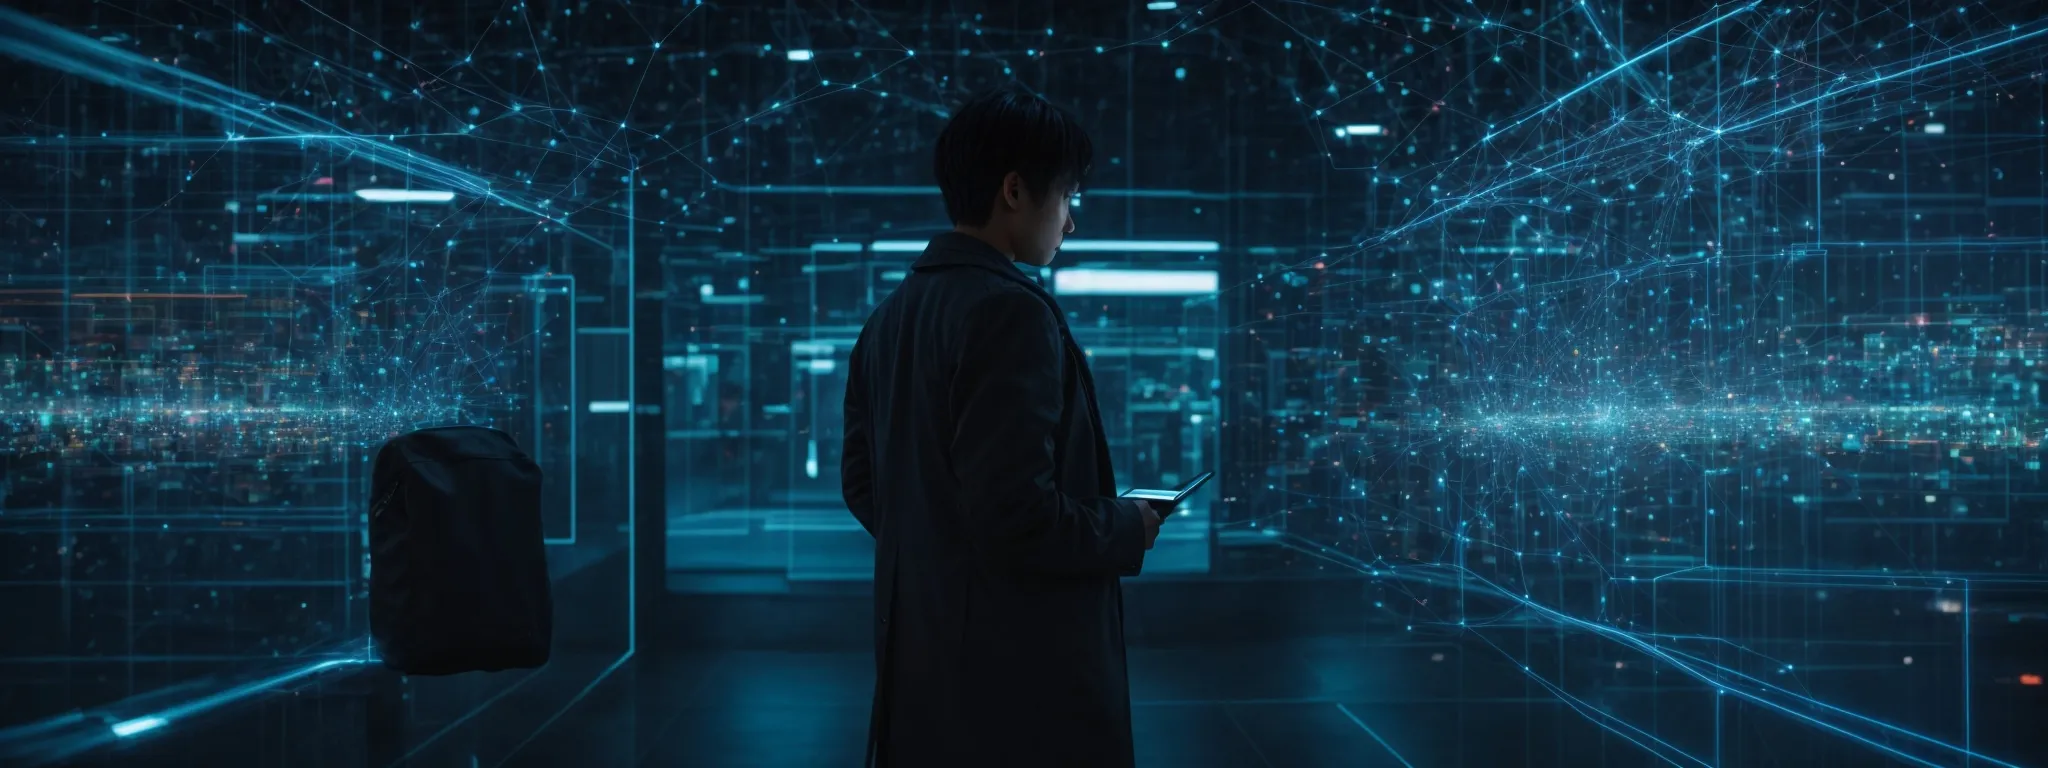 a person browsing through a holographic interface showcasing interconnected network nodes representing entities and their relationships.